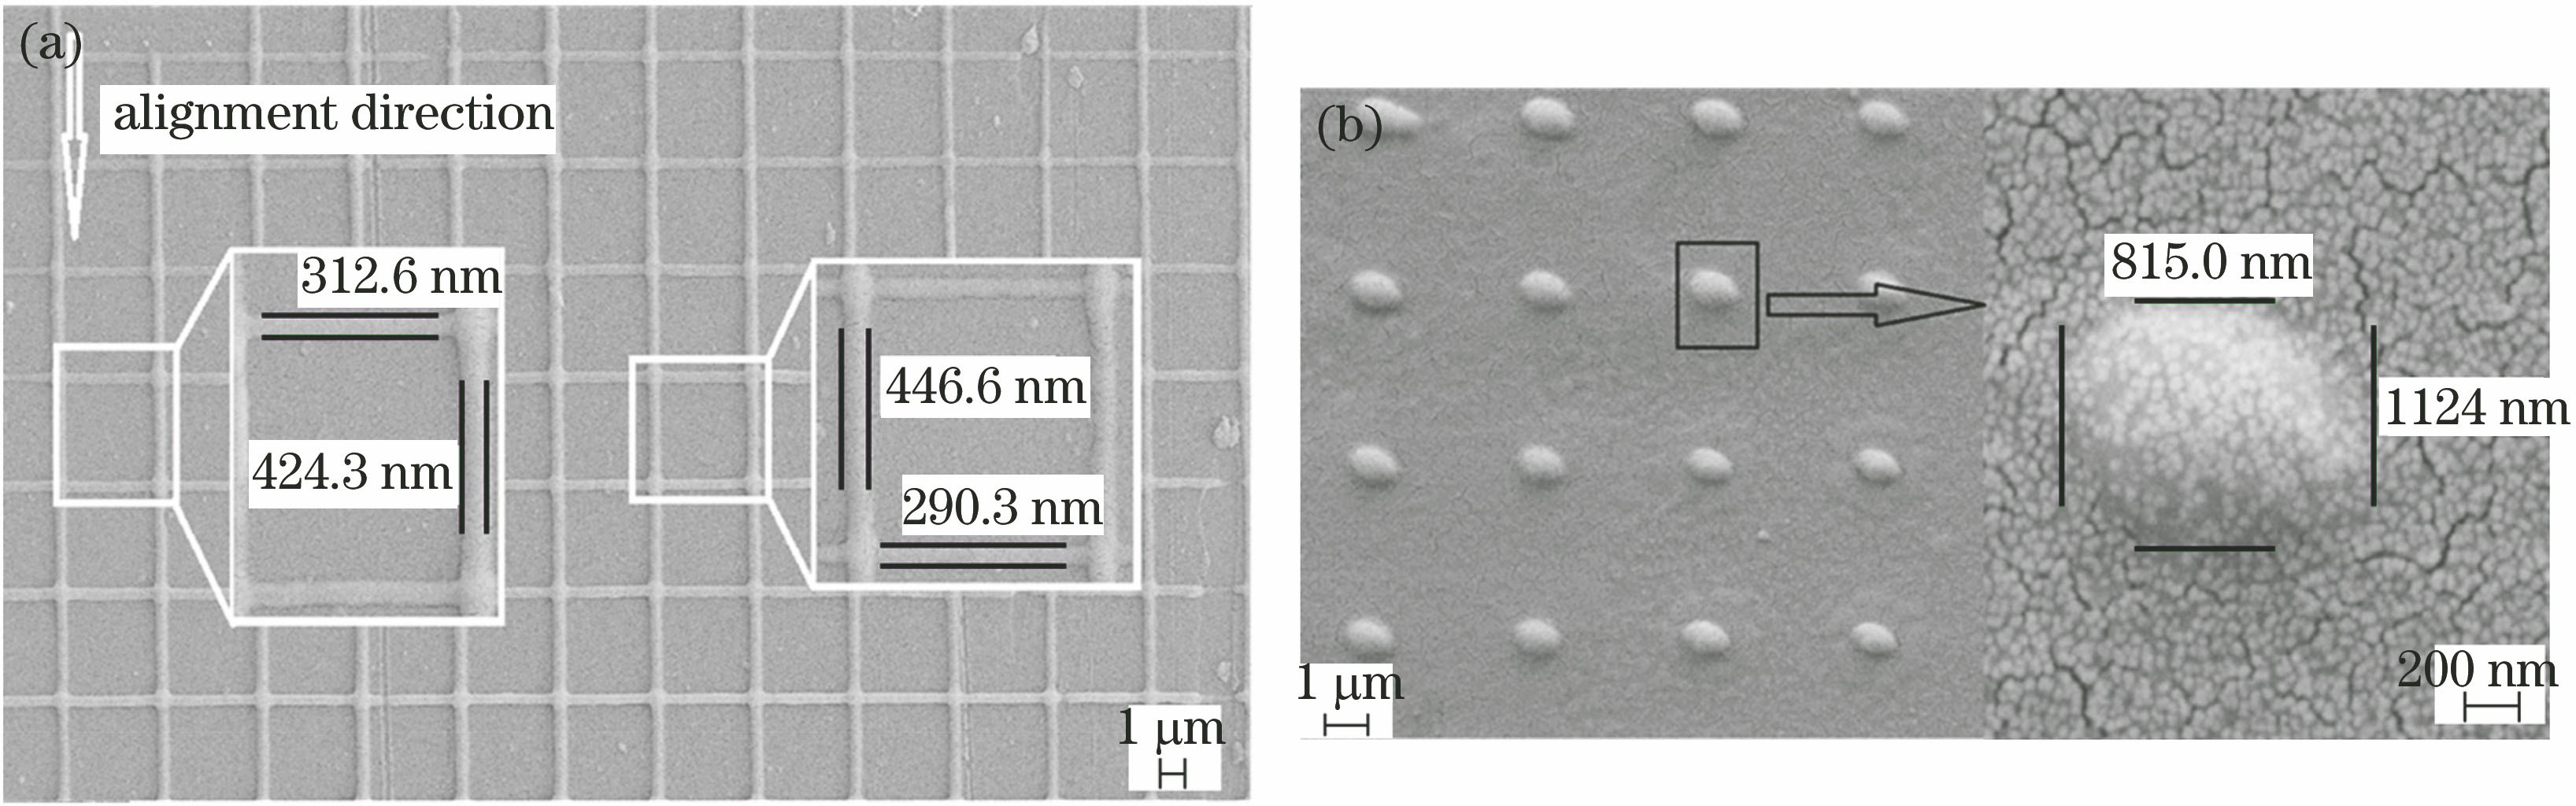 SEM images of polymerizable liquid crystal systems after processing[24]. (a) Two-dimensional grating; (b) two-dimensional lattice